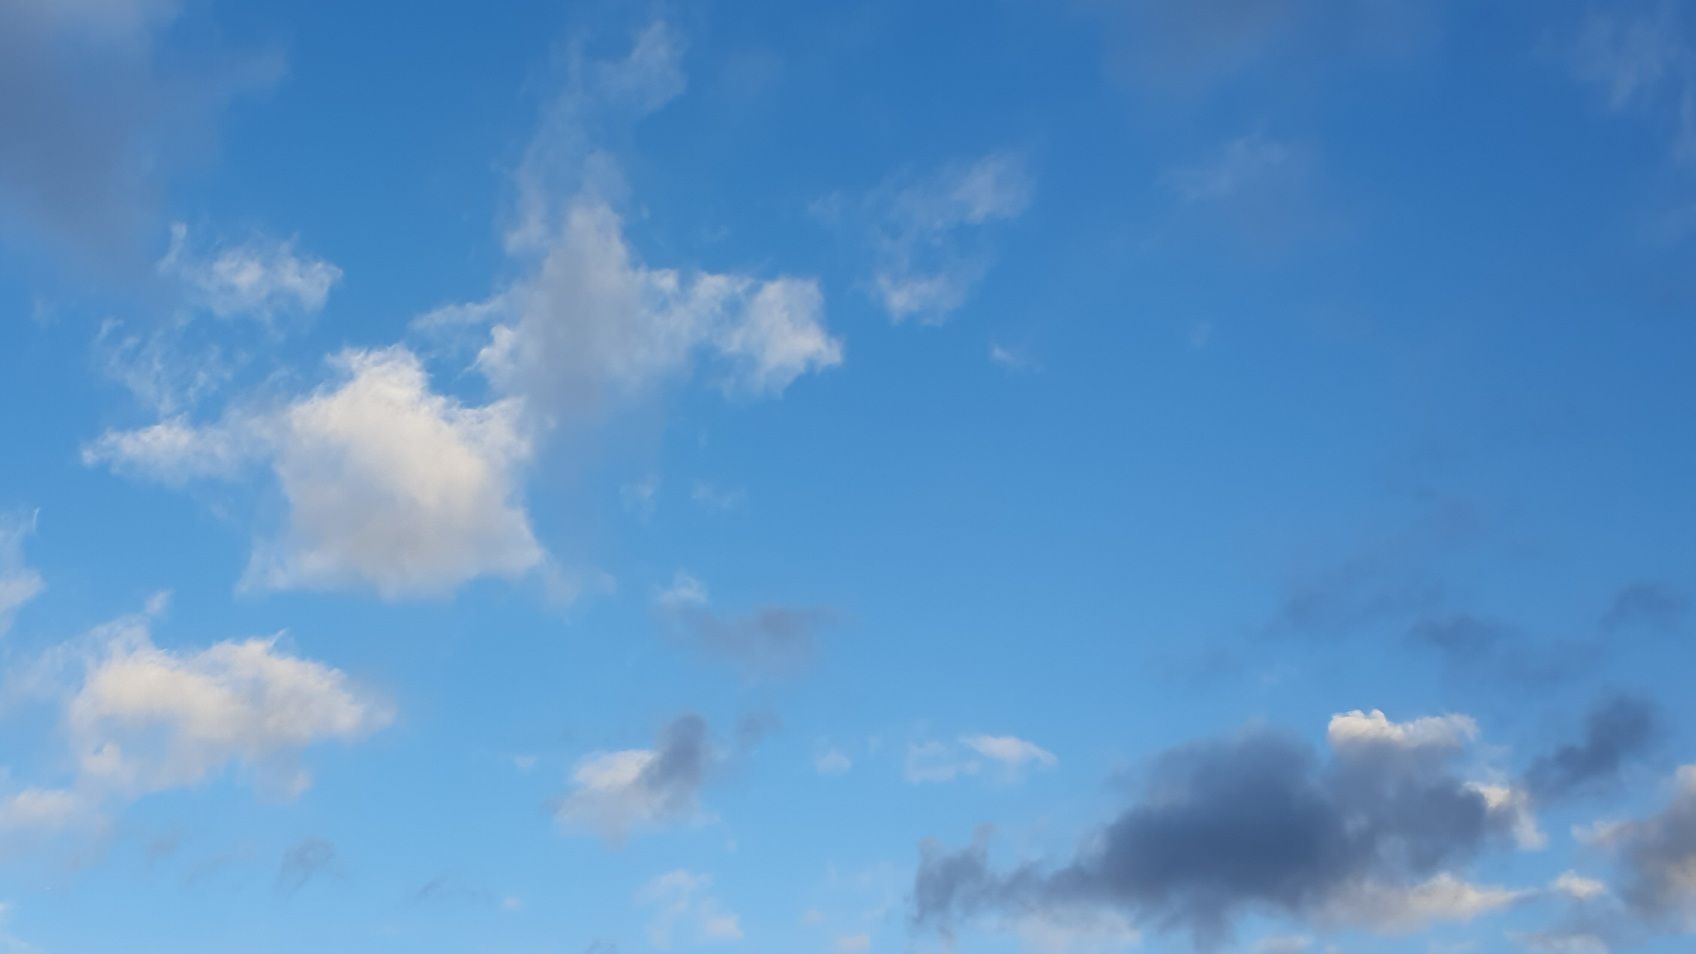 Photo of a blue sky with a few white clouds and one grey one in the bottom right corner